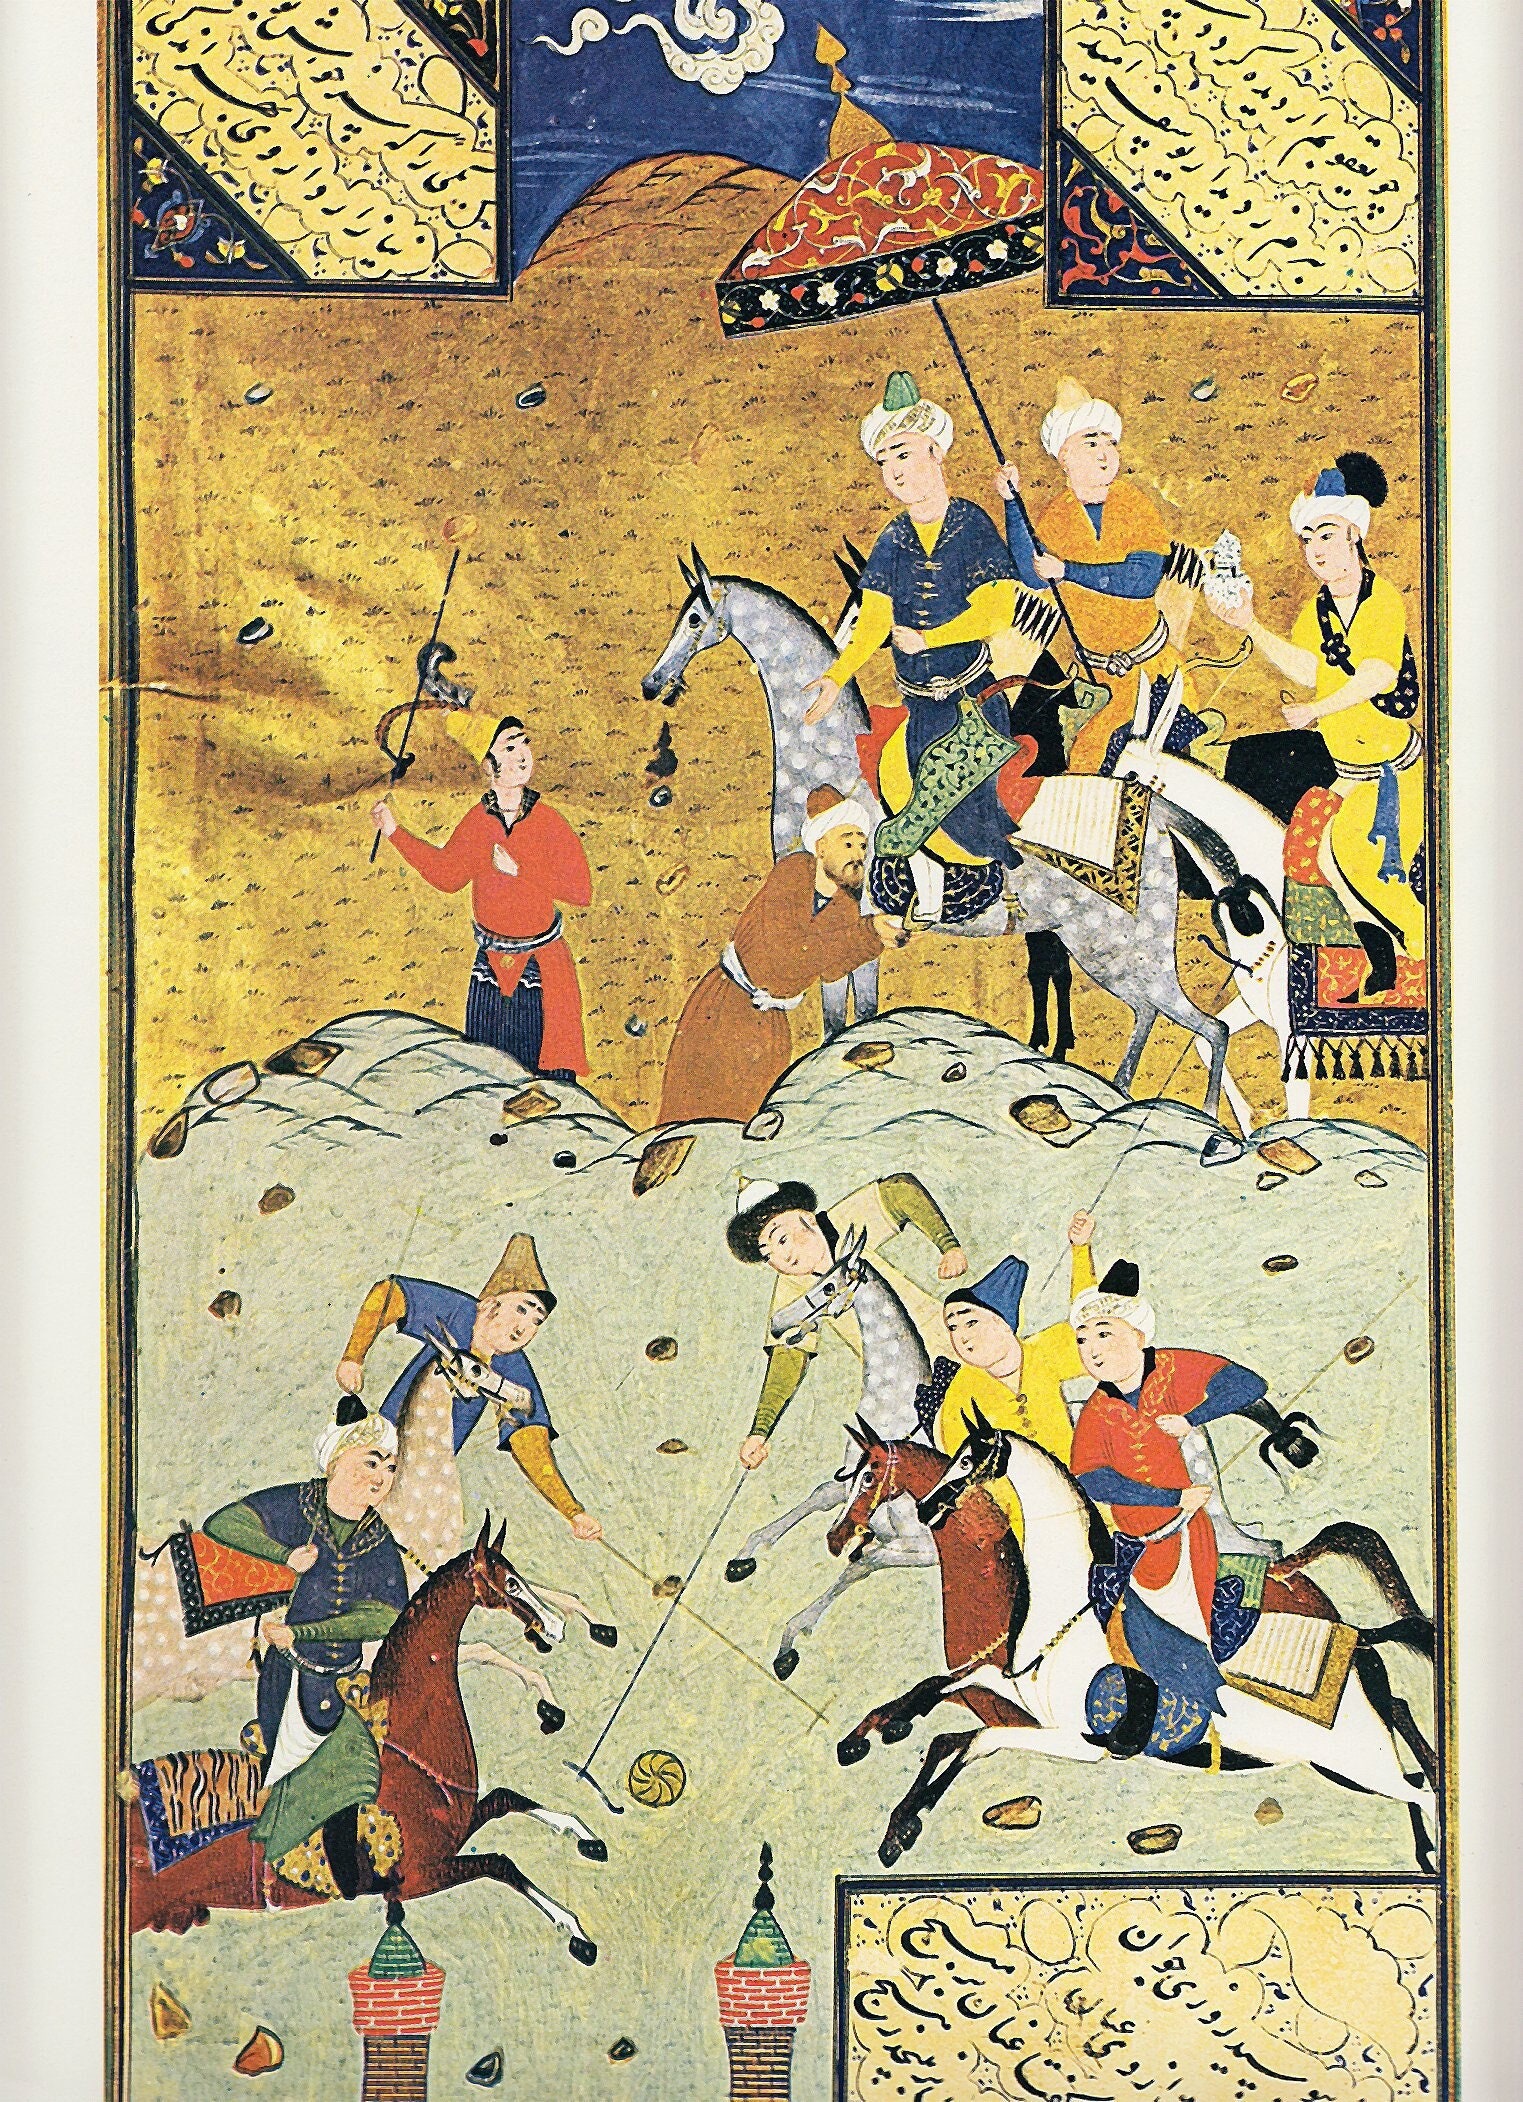 Persian Miniature Painting. [Ancient Game of Polo]. - Raptis Rare